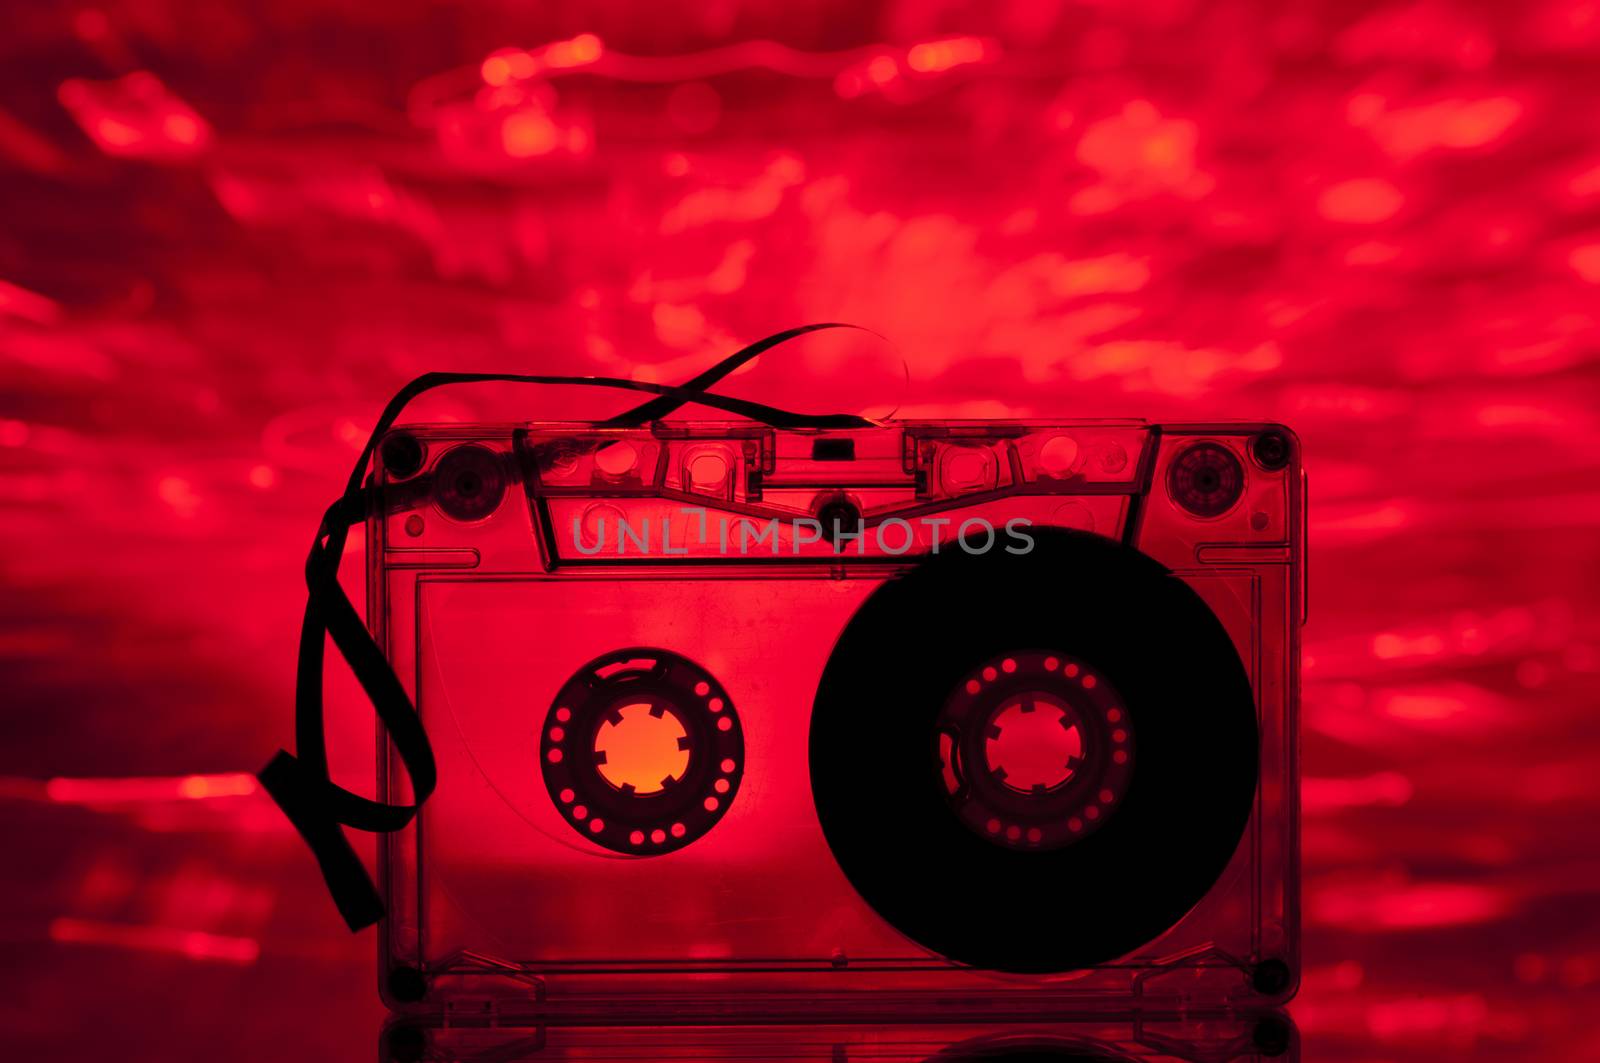 Cassette tape and multicolored lights on background